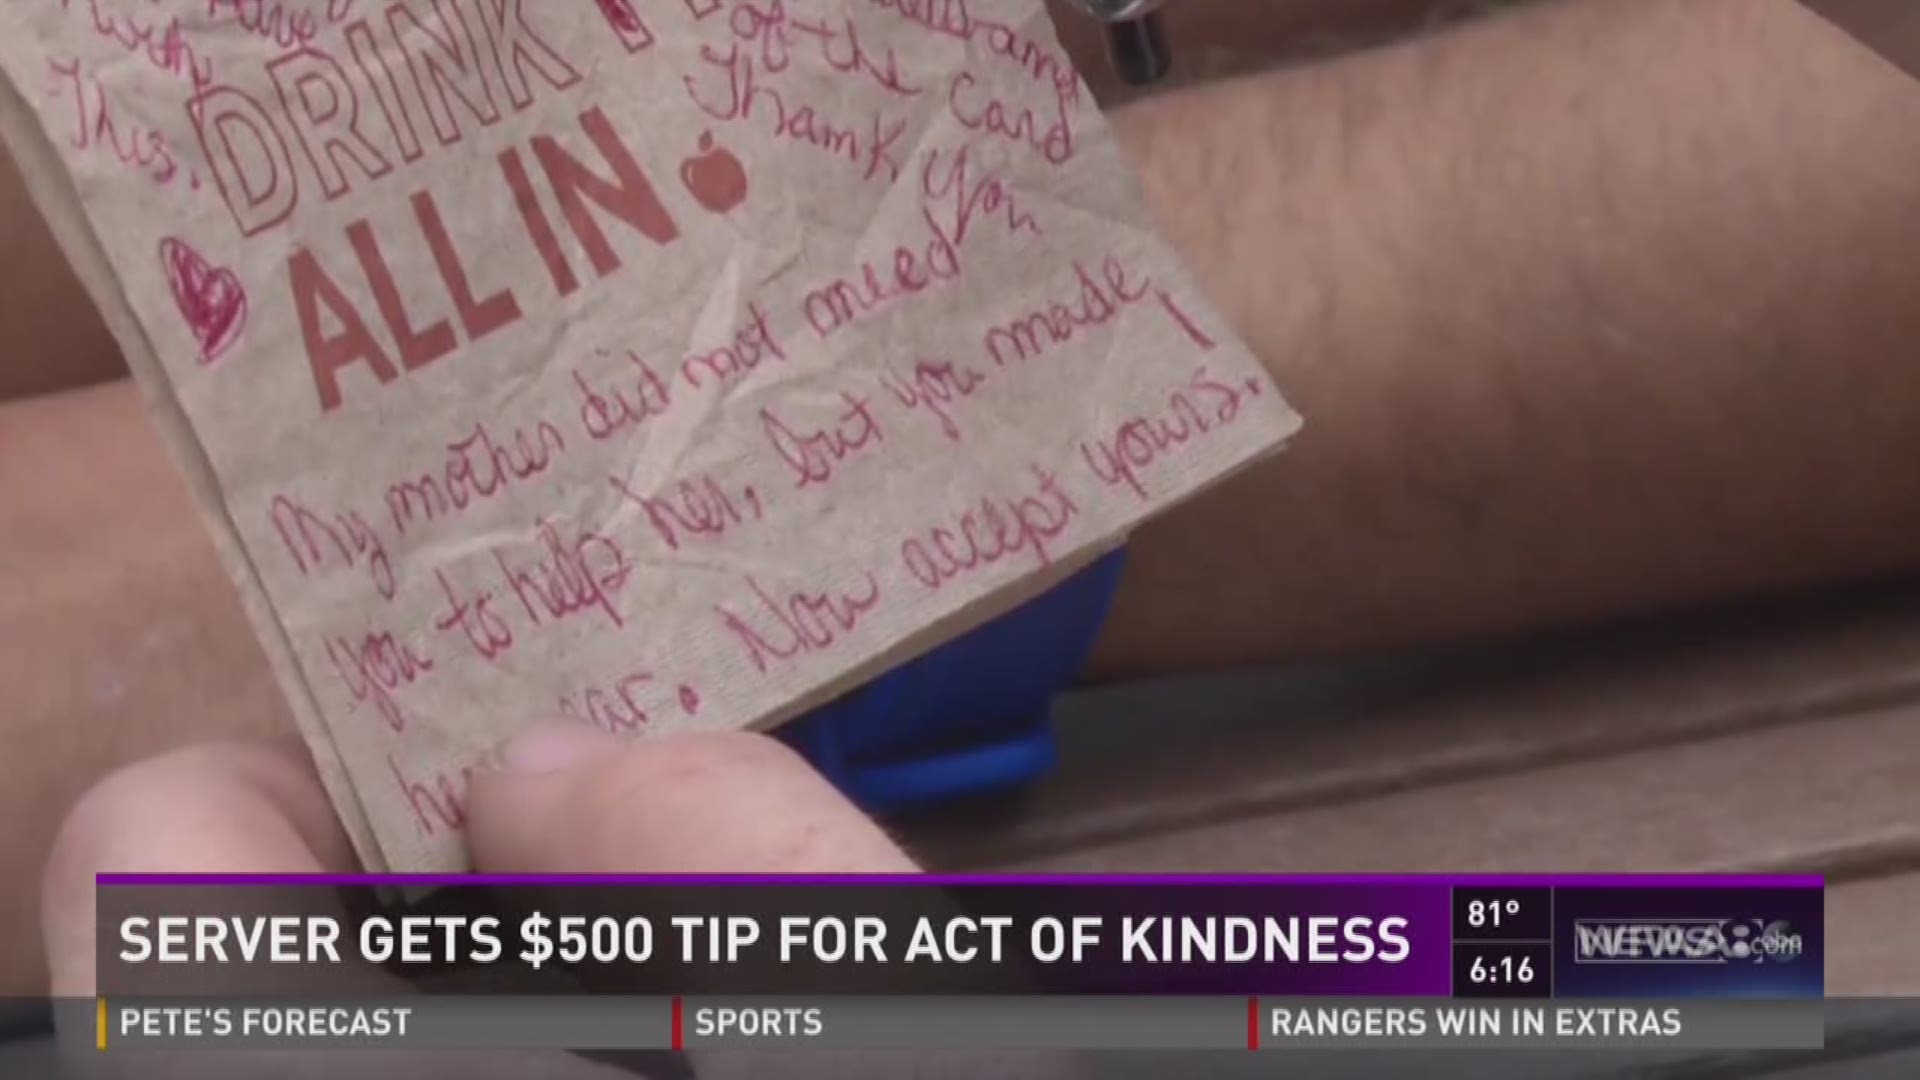 Server gets $500 tip for act of kindness